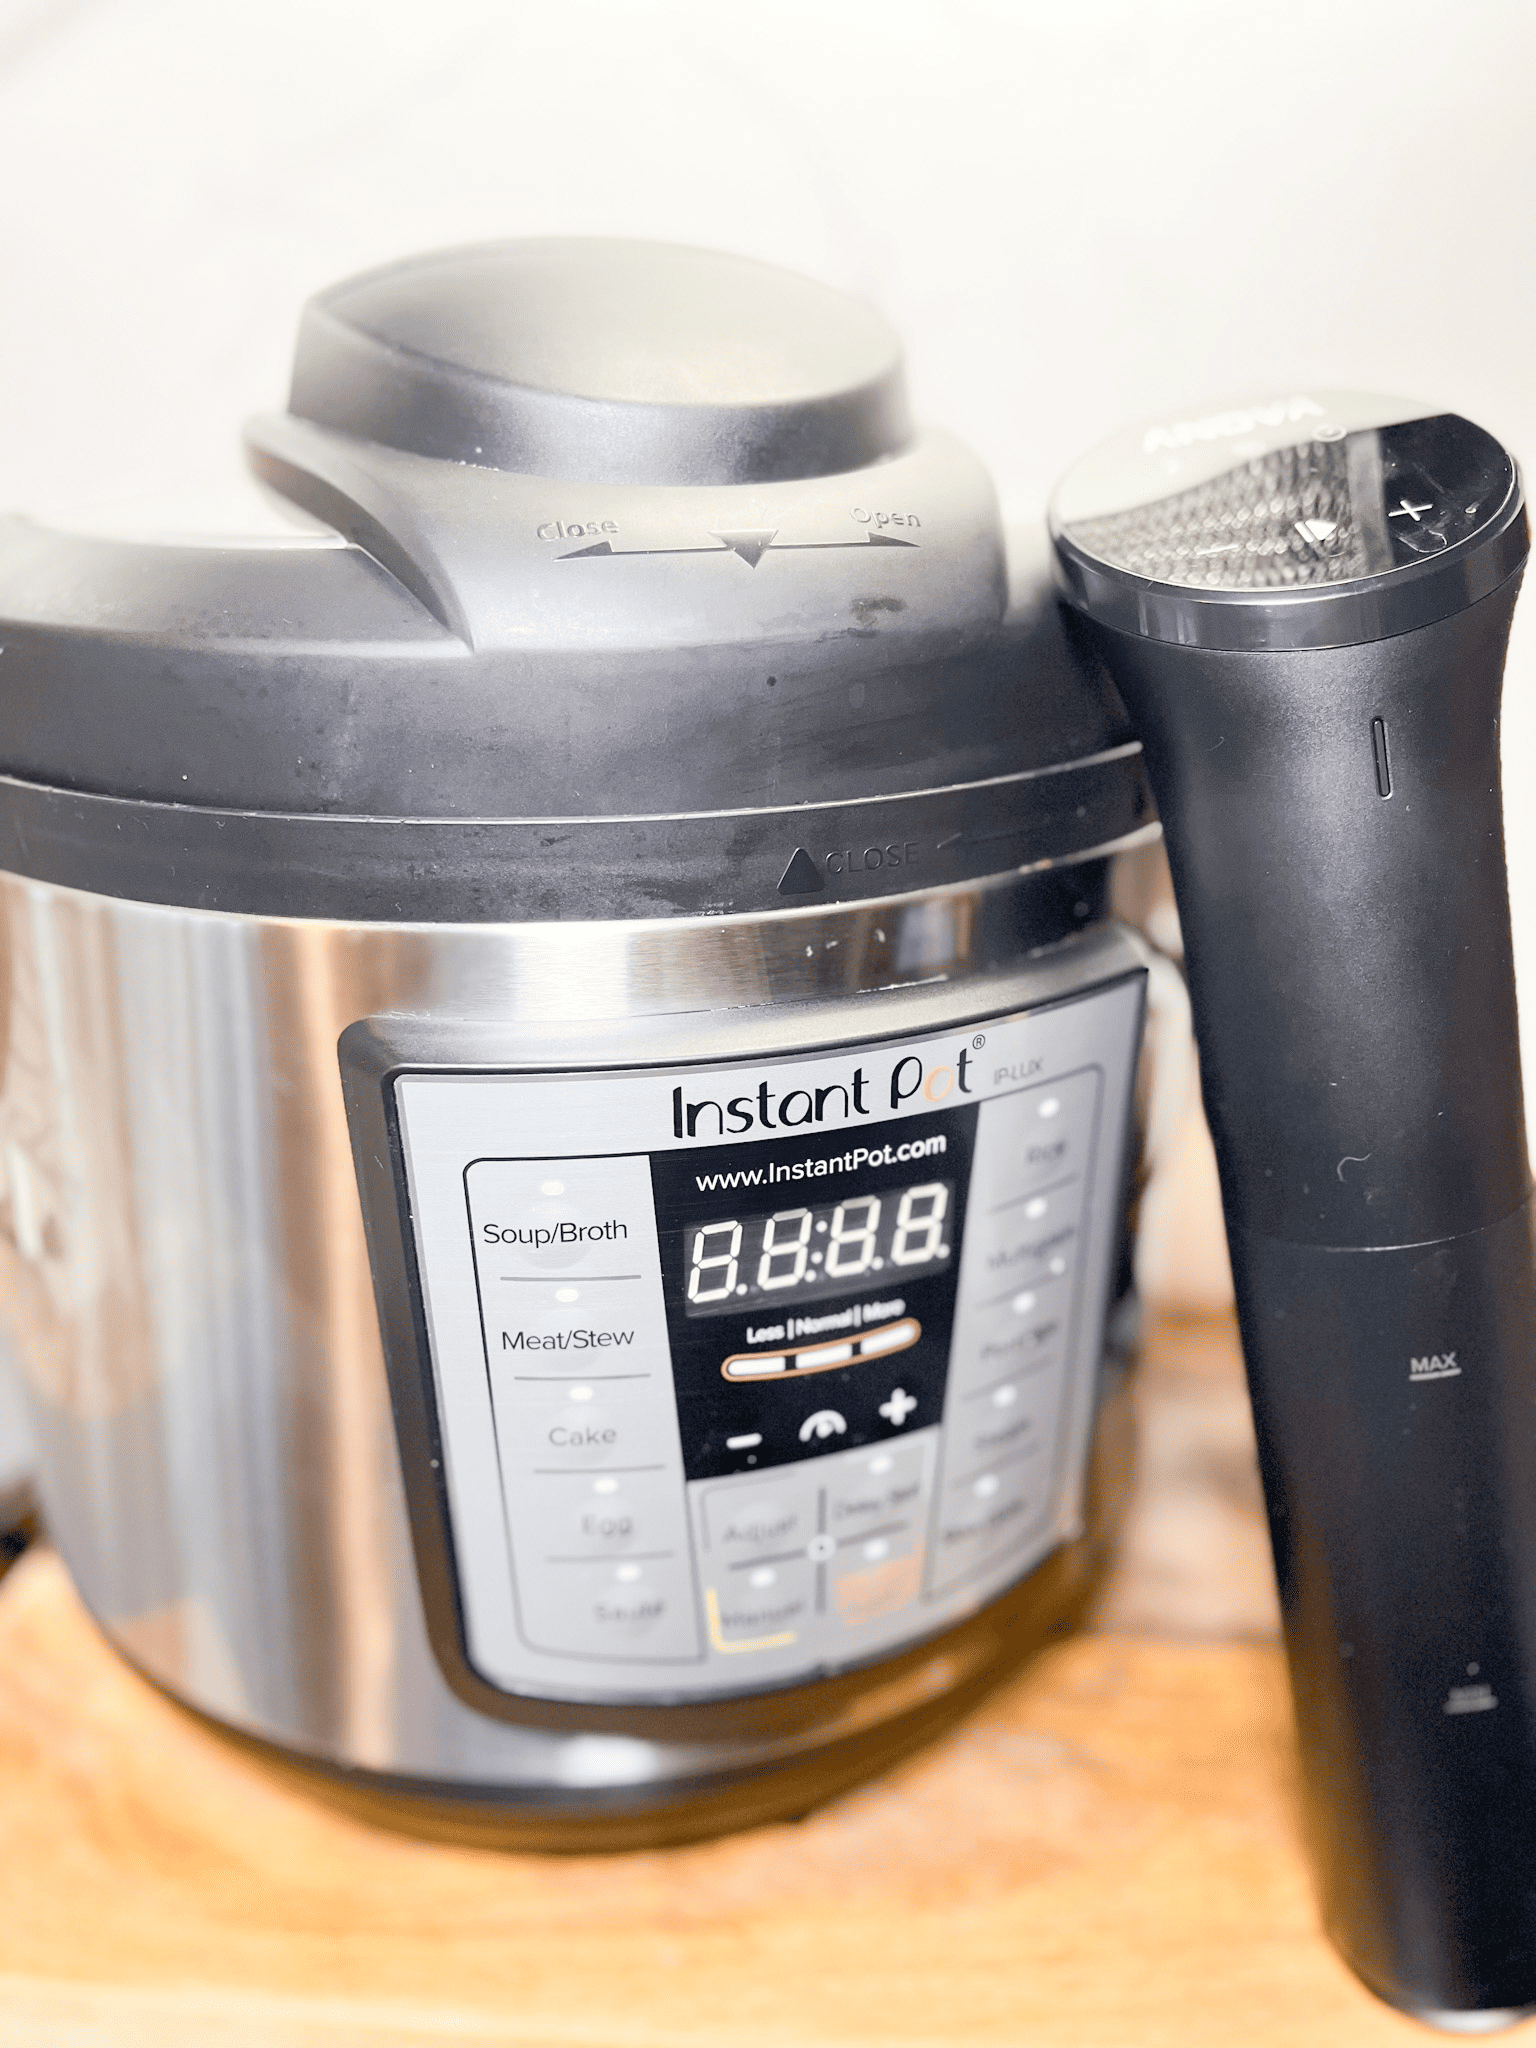 Sous Vide vs Pressure Cooker: What’s the Difference?